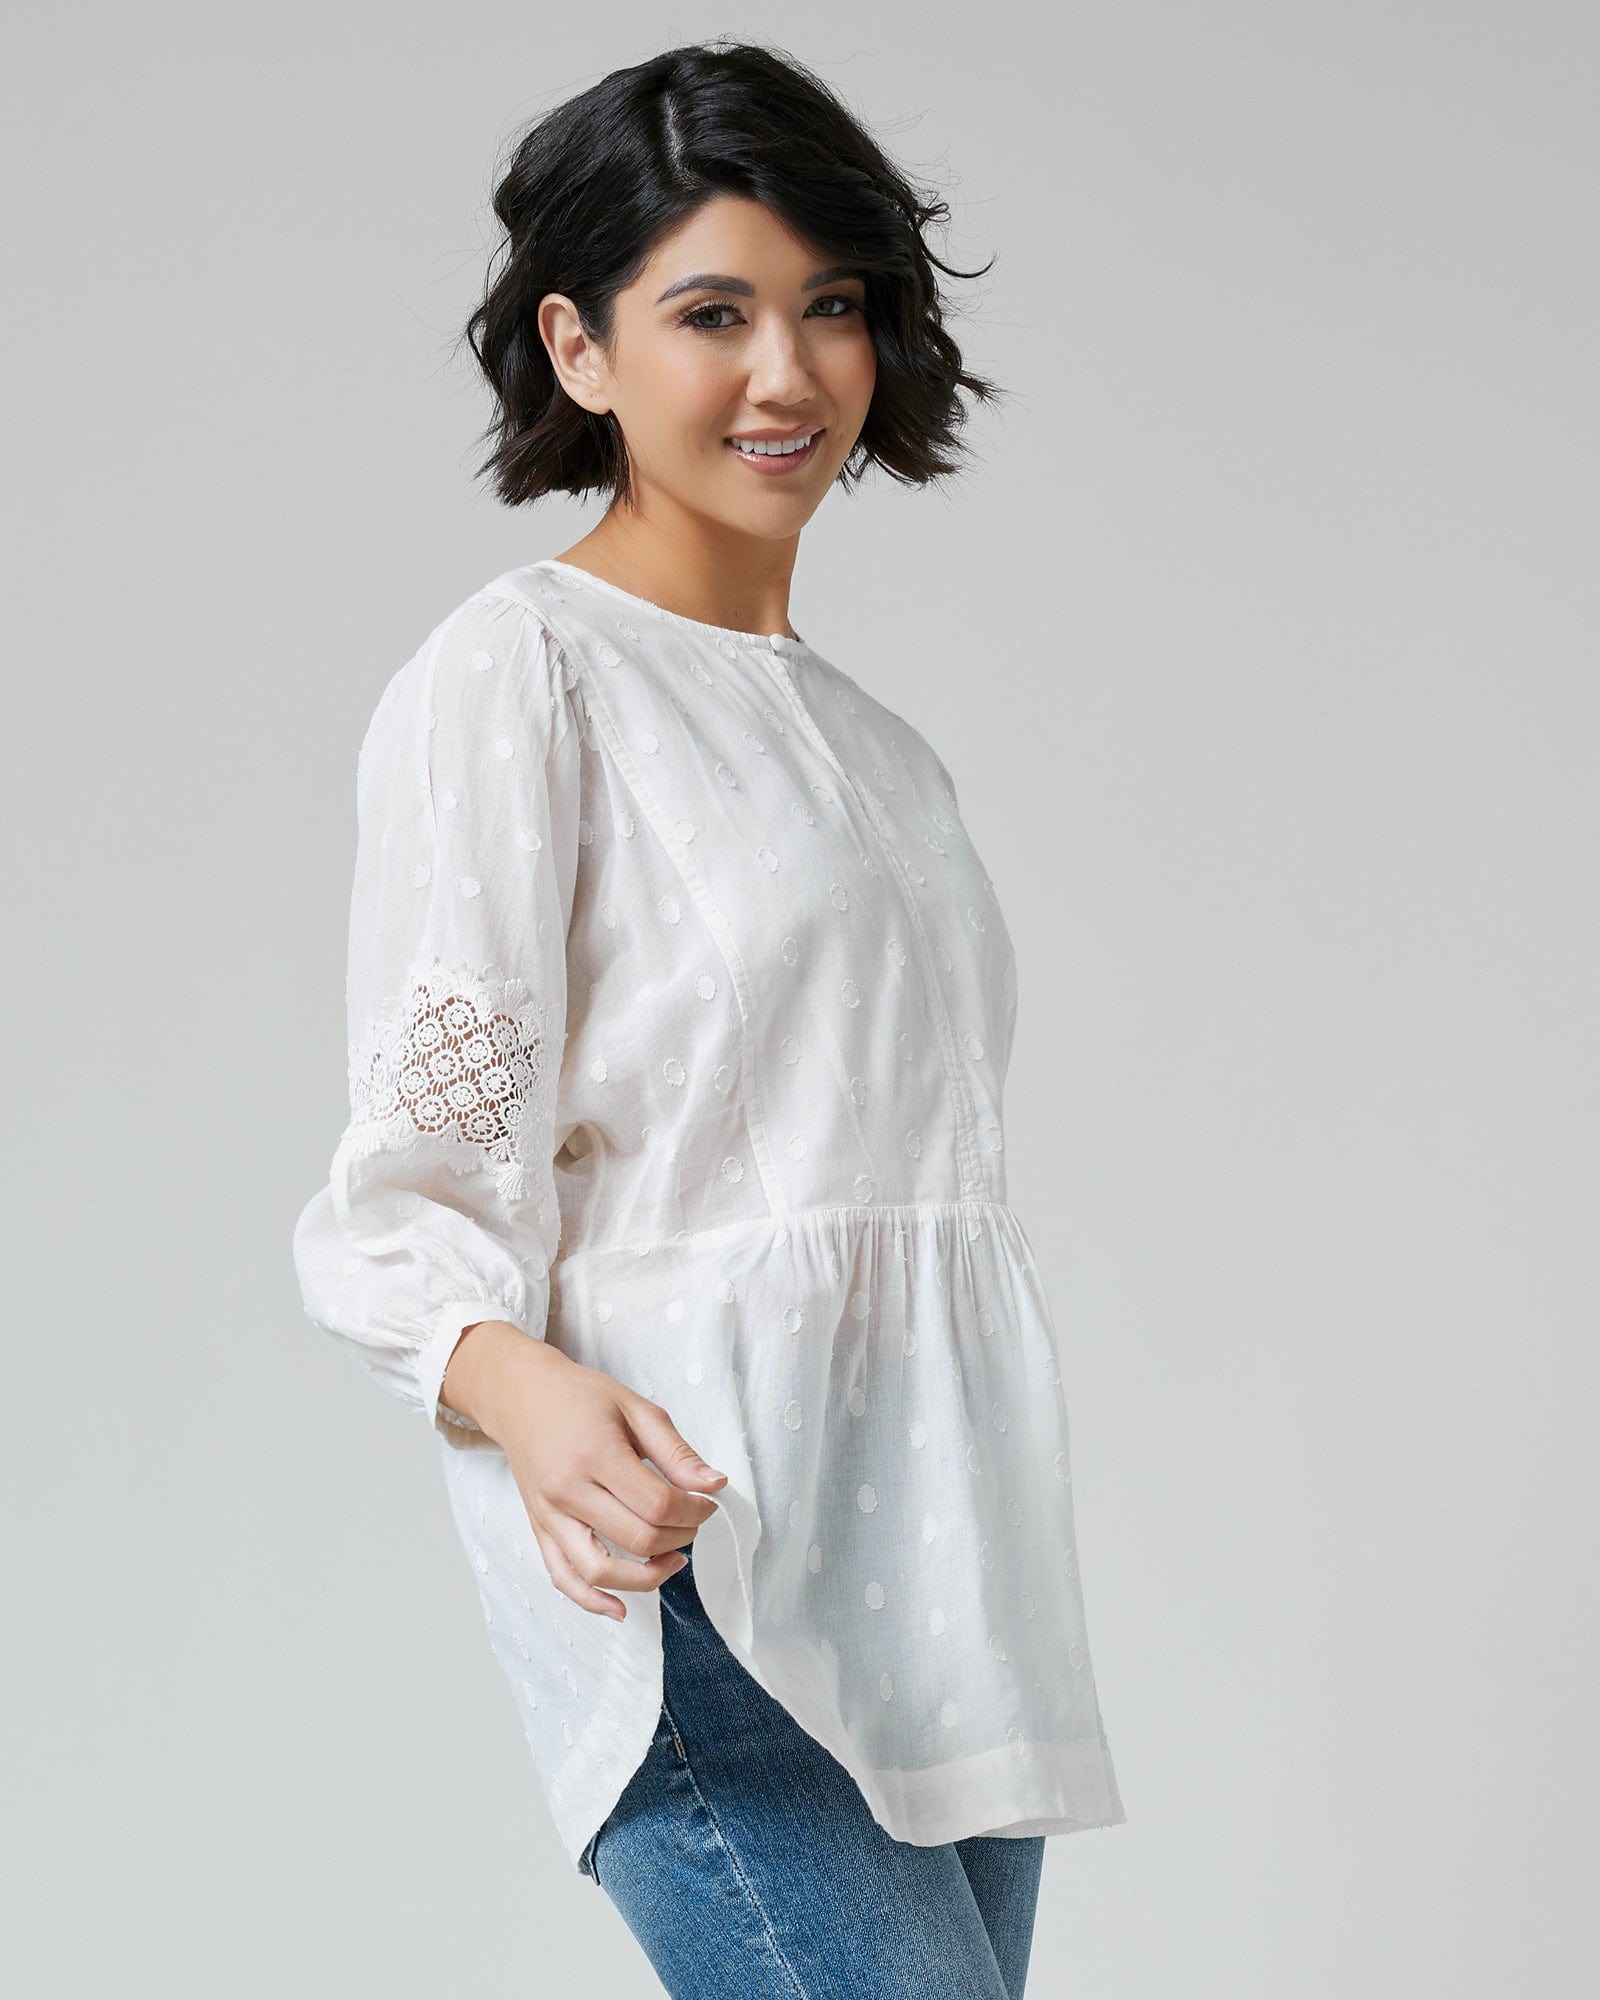 Woman in a white, 3/4 sleeve, peplum blouse